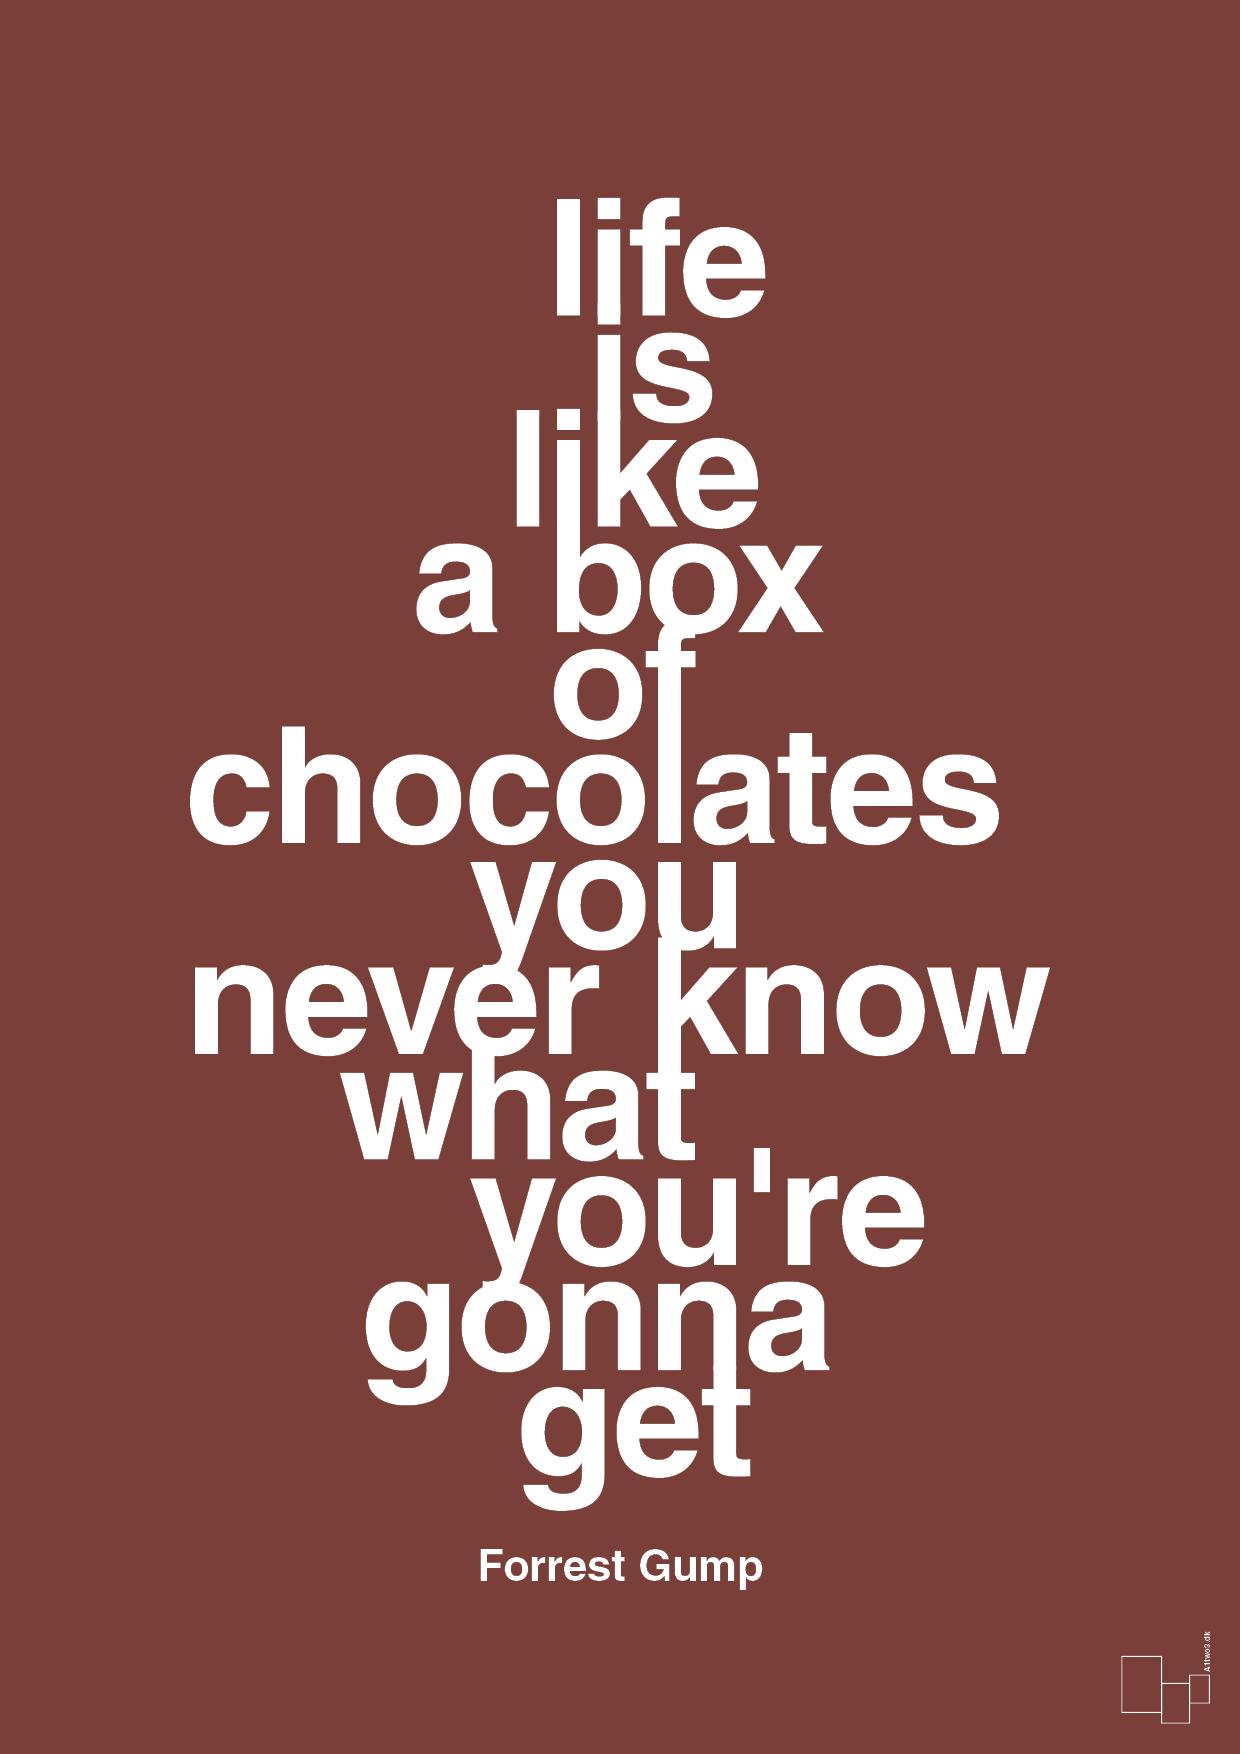 life is like a box of chocolates you never know what you're gonna get - Plakat med Citater i Red Pepper